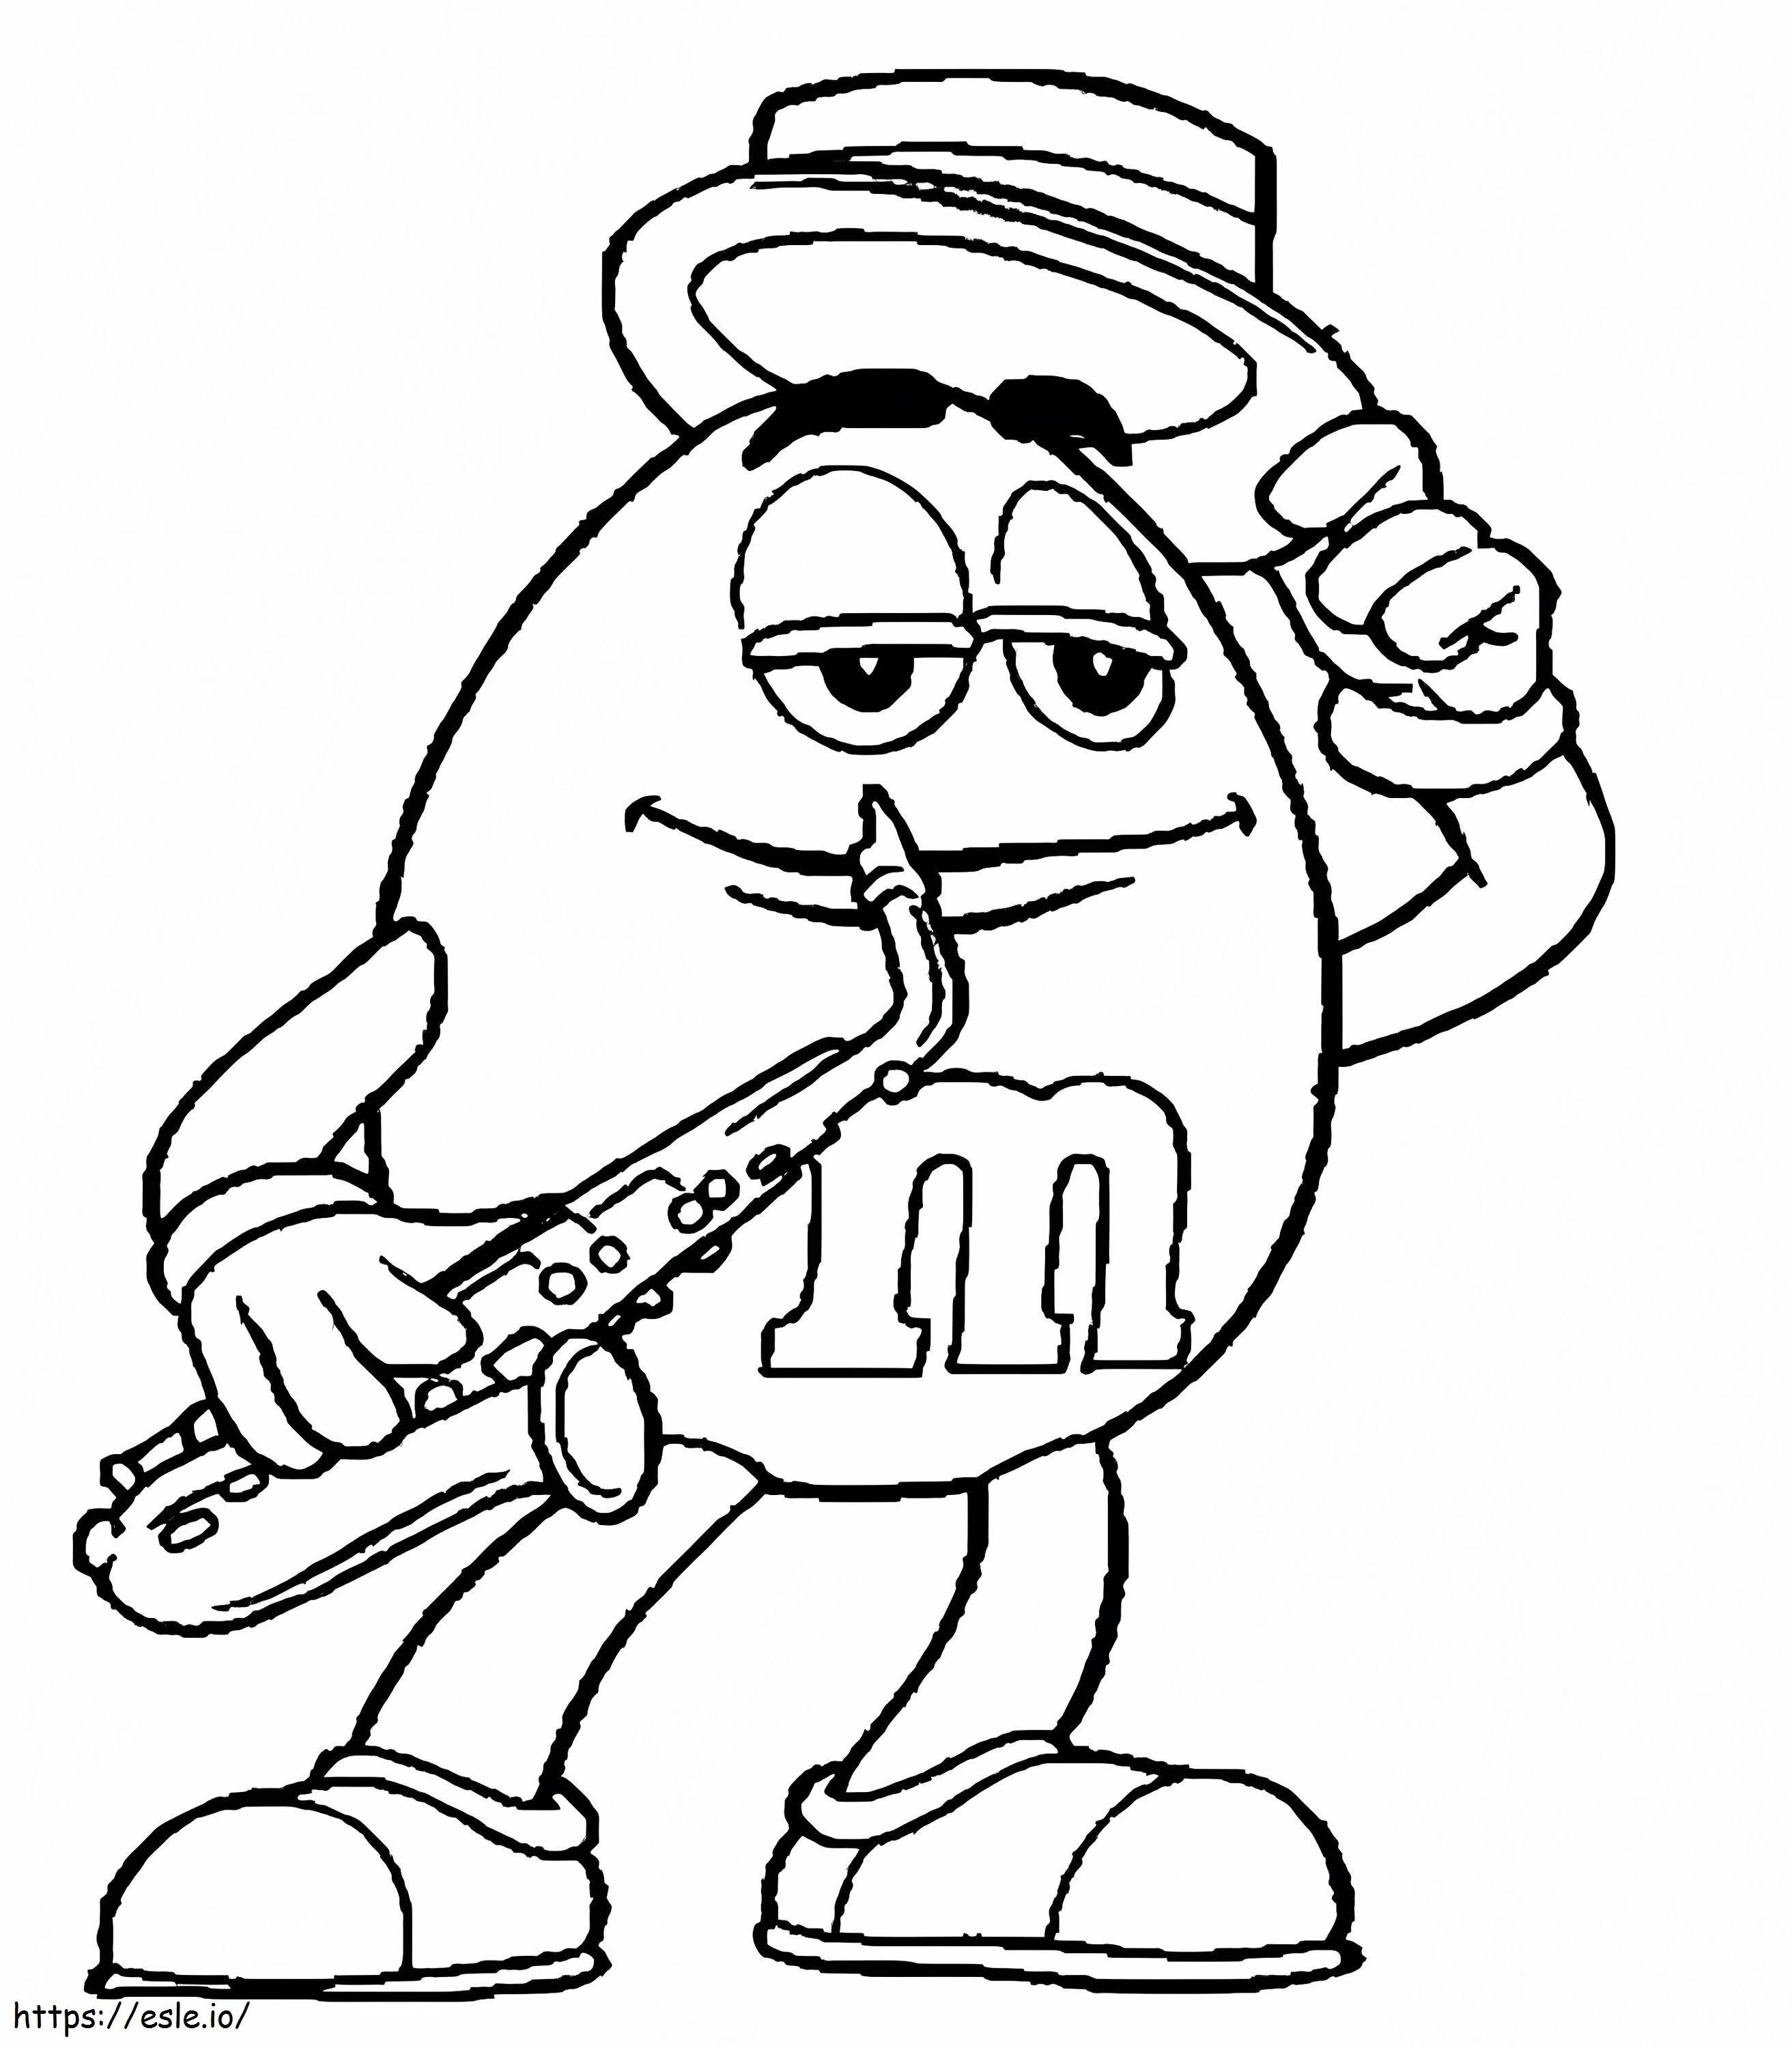 Mm Playing Saxophone coloring page